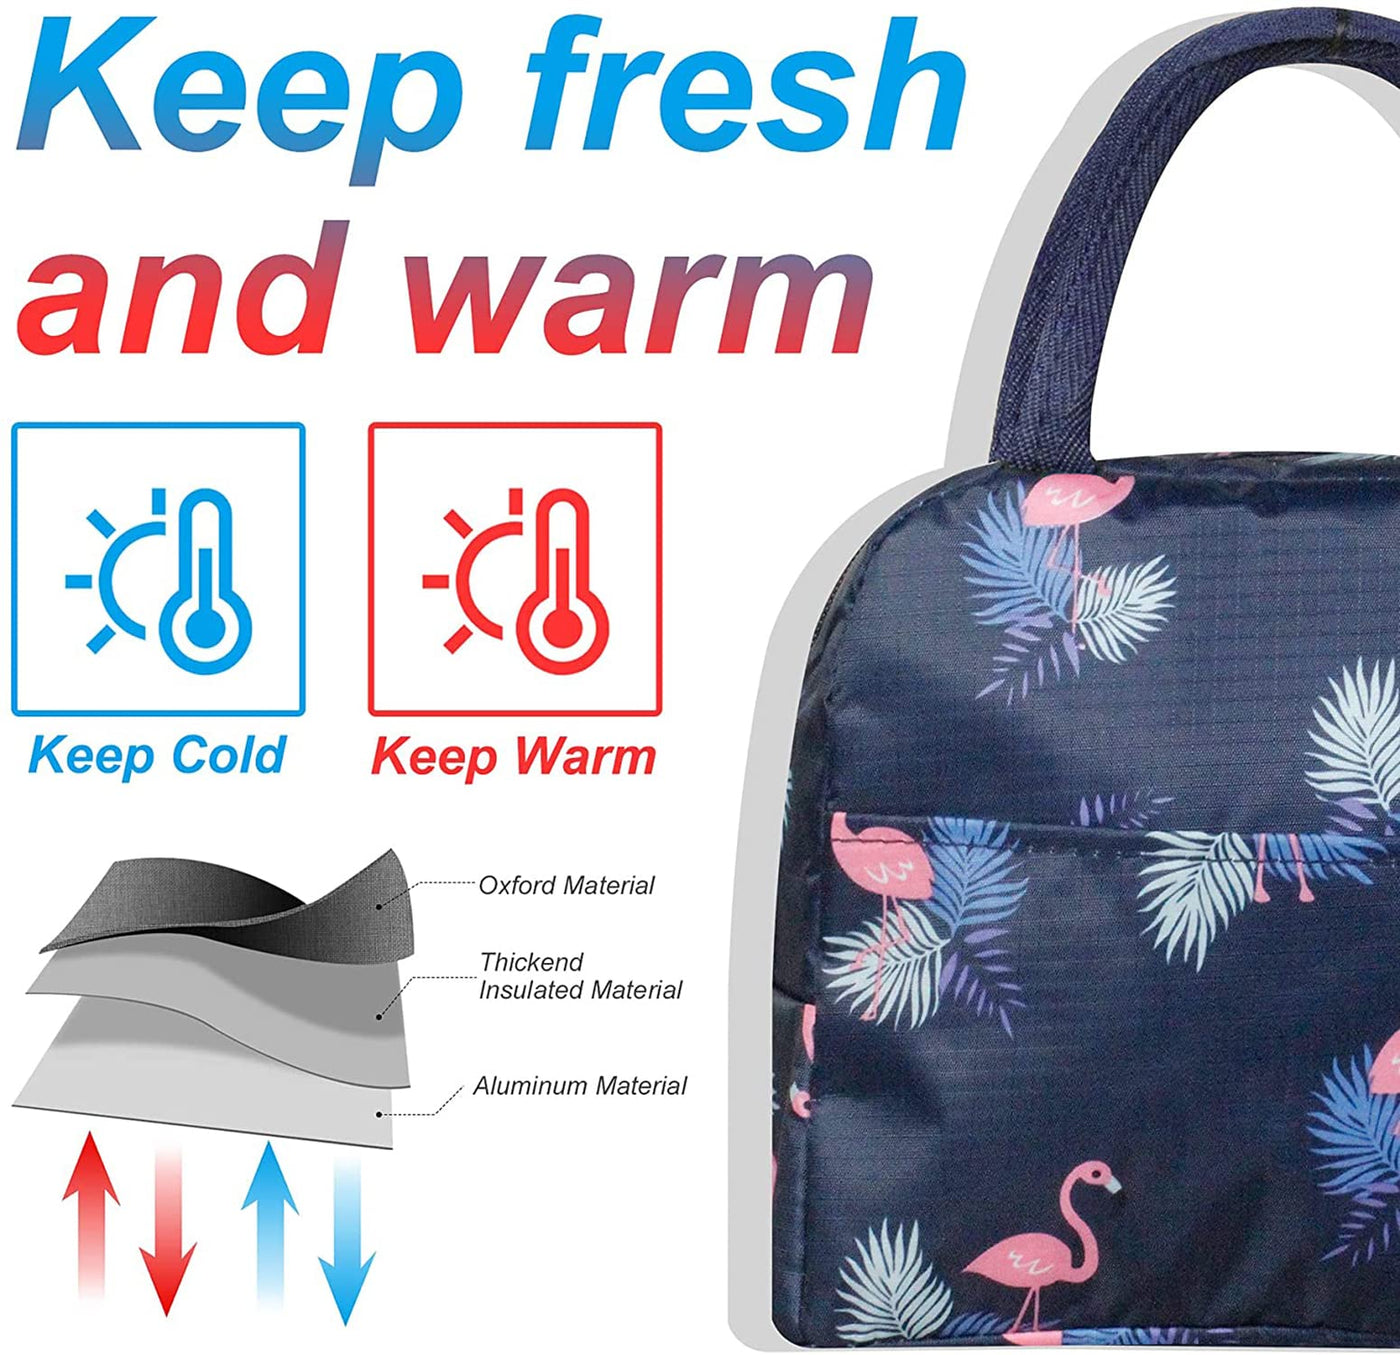 Insulated Small Lunch Bags for Women